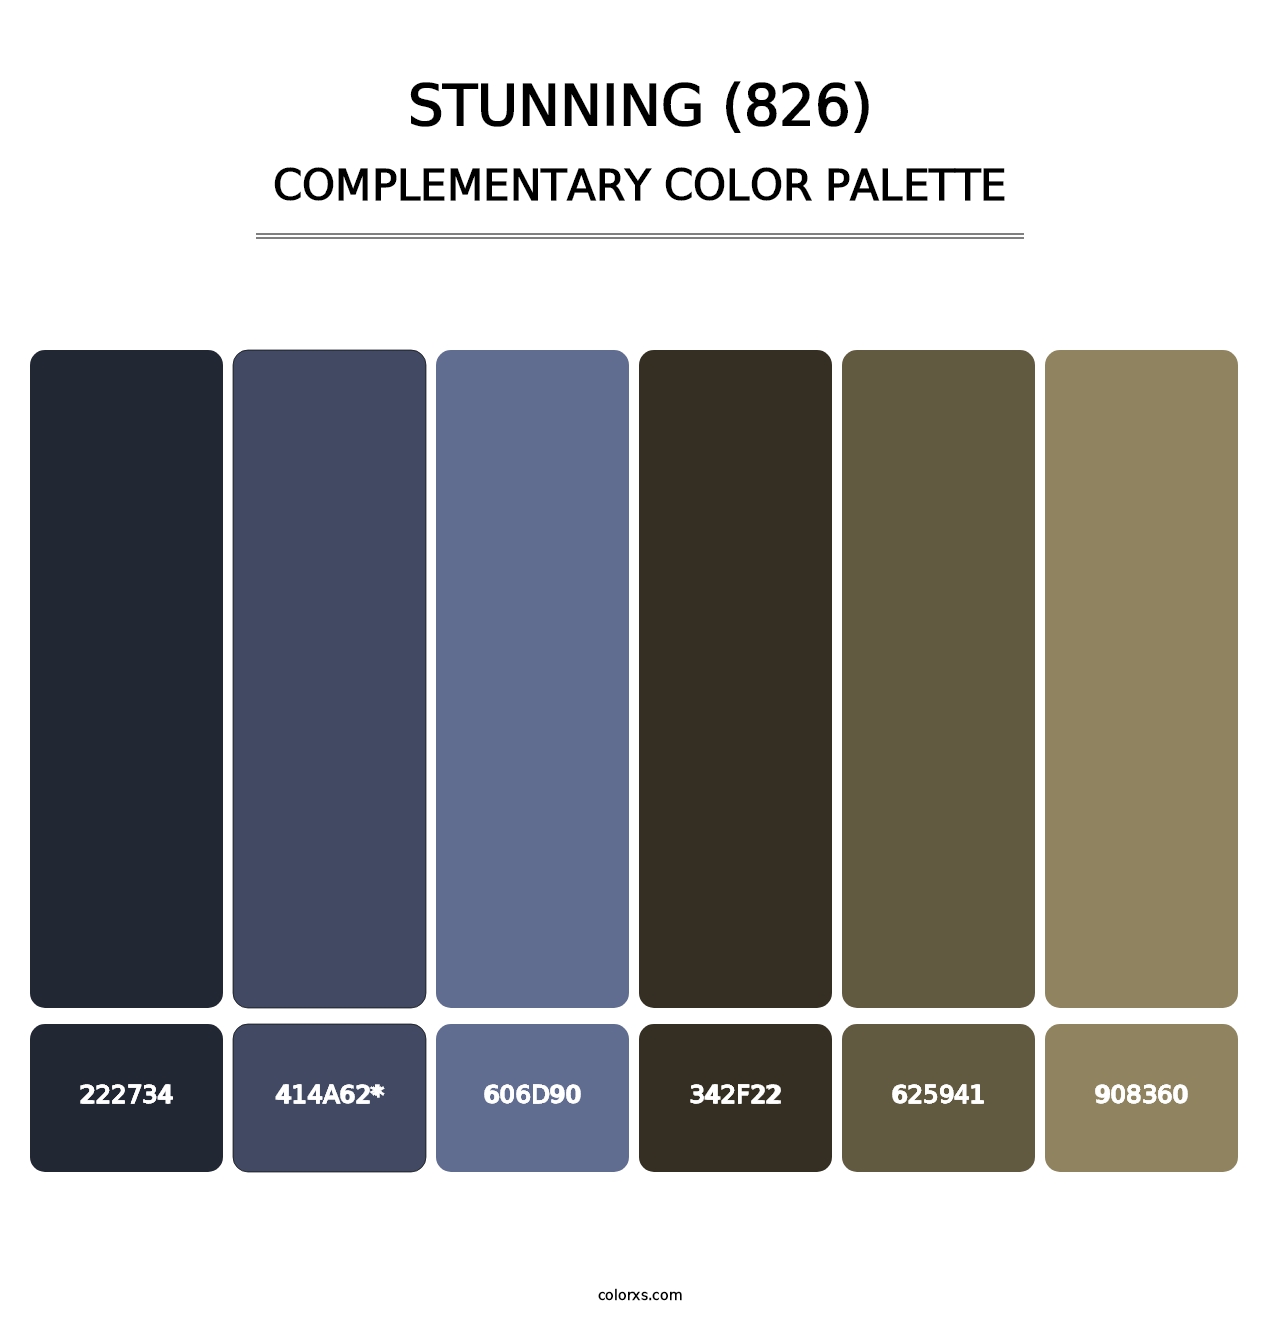 Stunning (826) - Complementary Color Palette